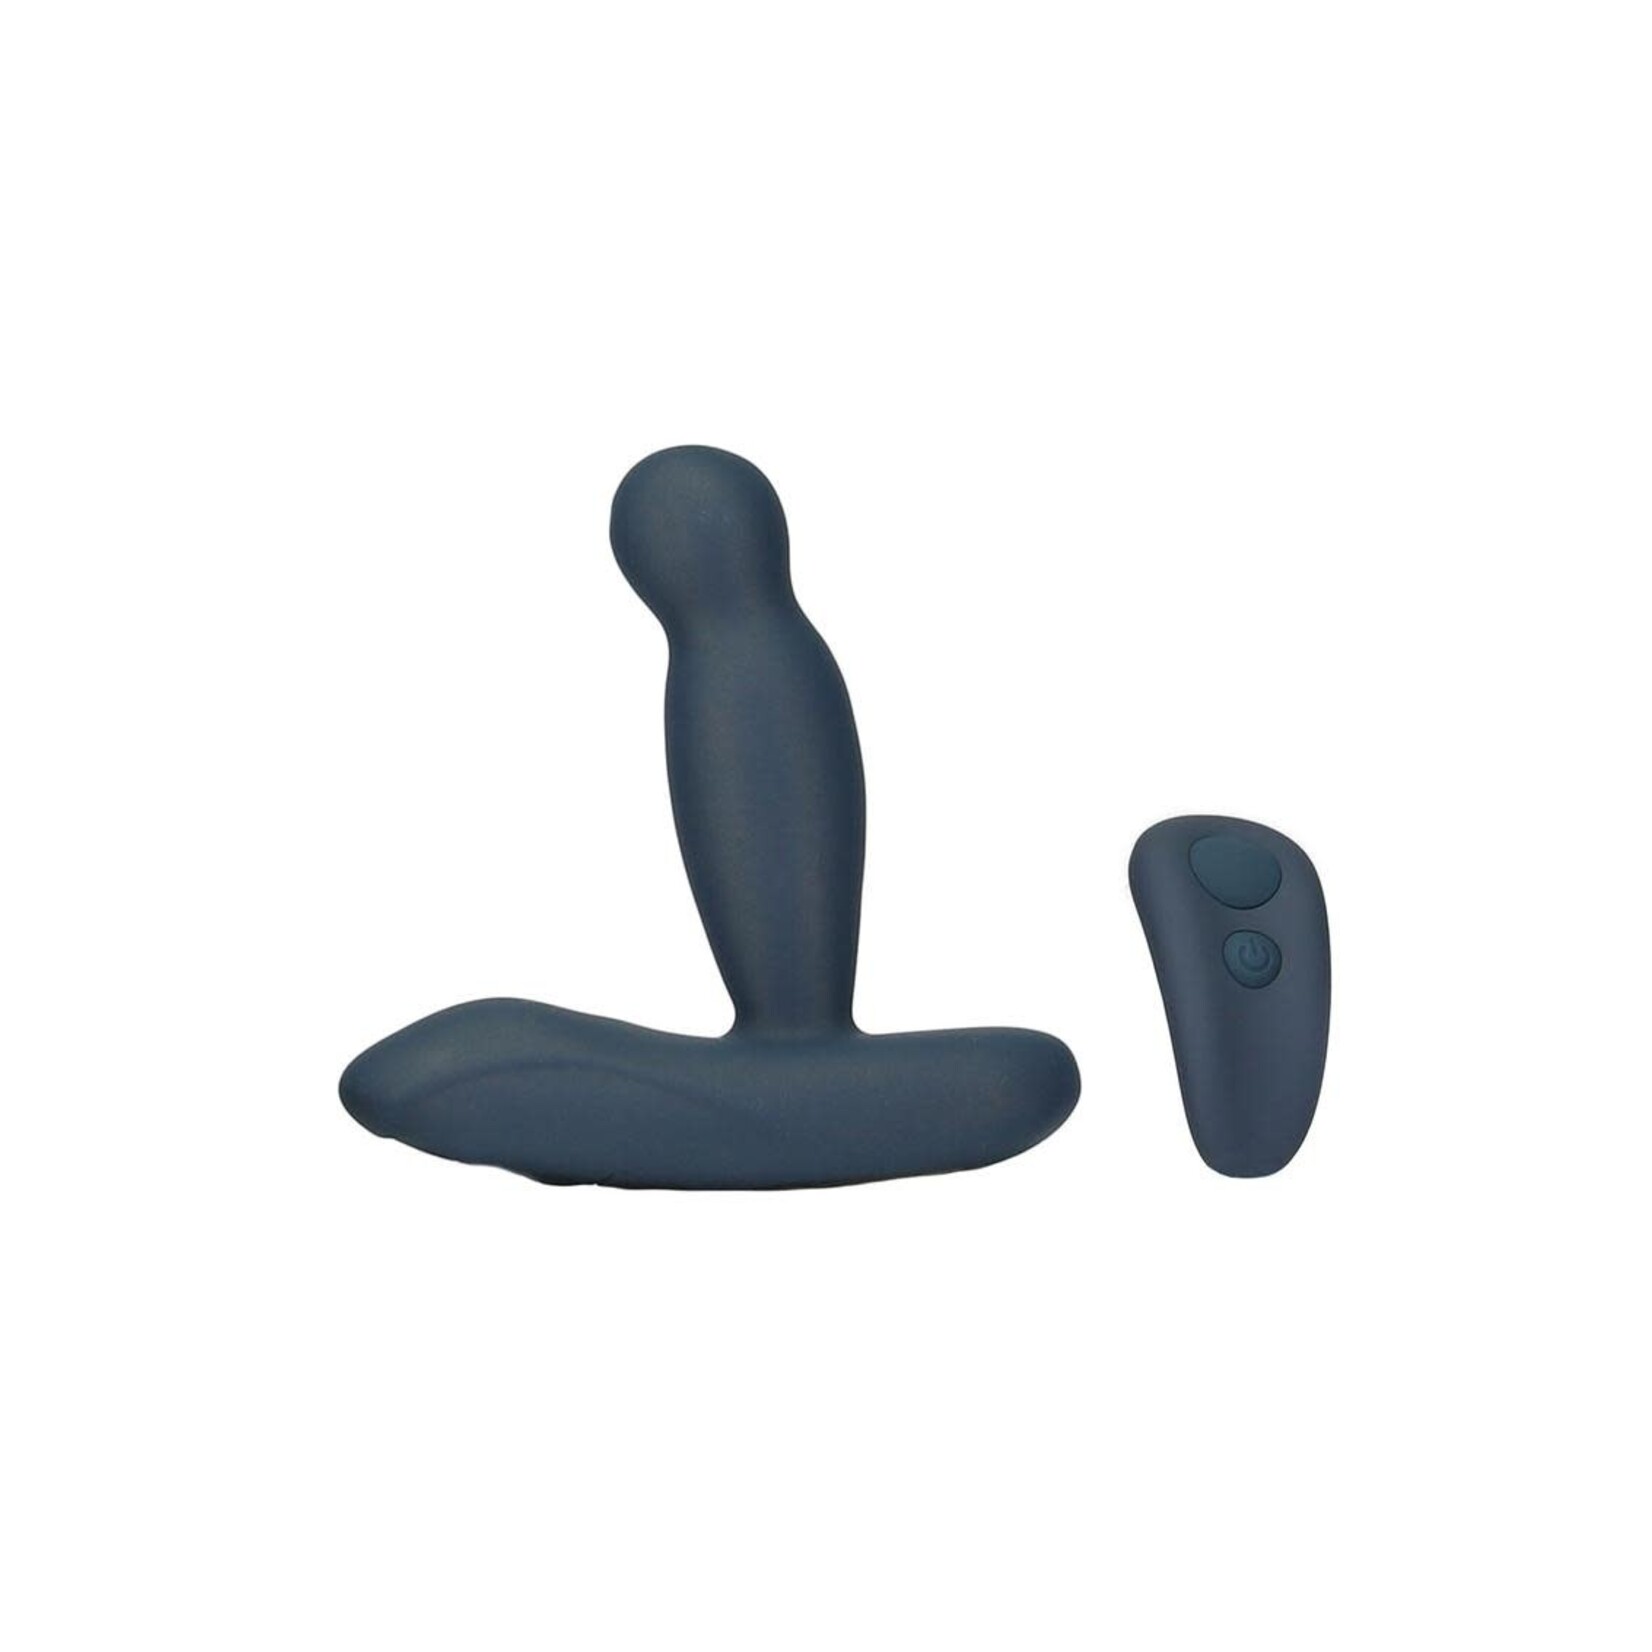 Lux Active Revolve Silicone Rechargeable Rotating & Vibrating Anal Massager With Remote Control - Navy